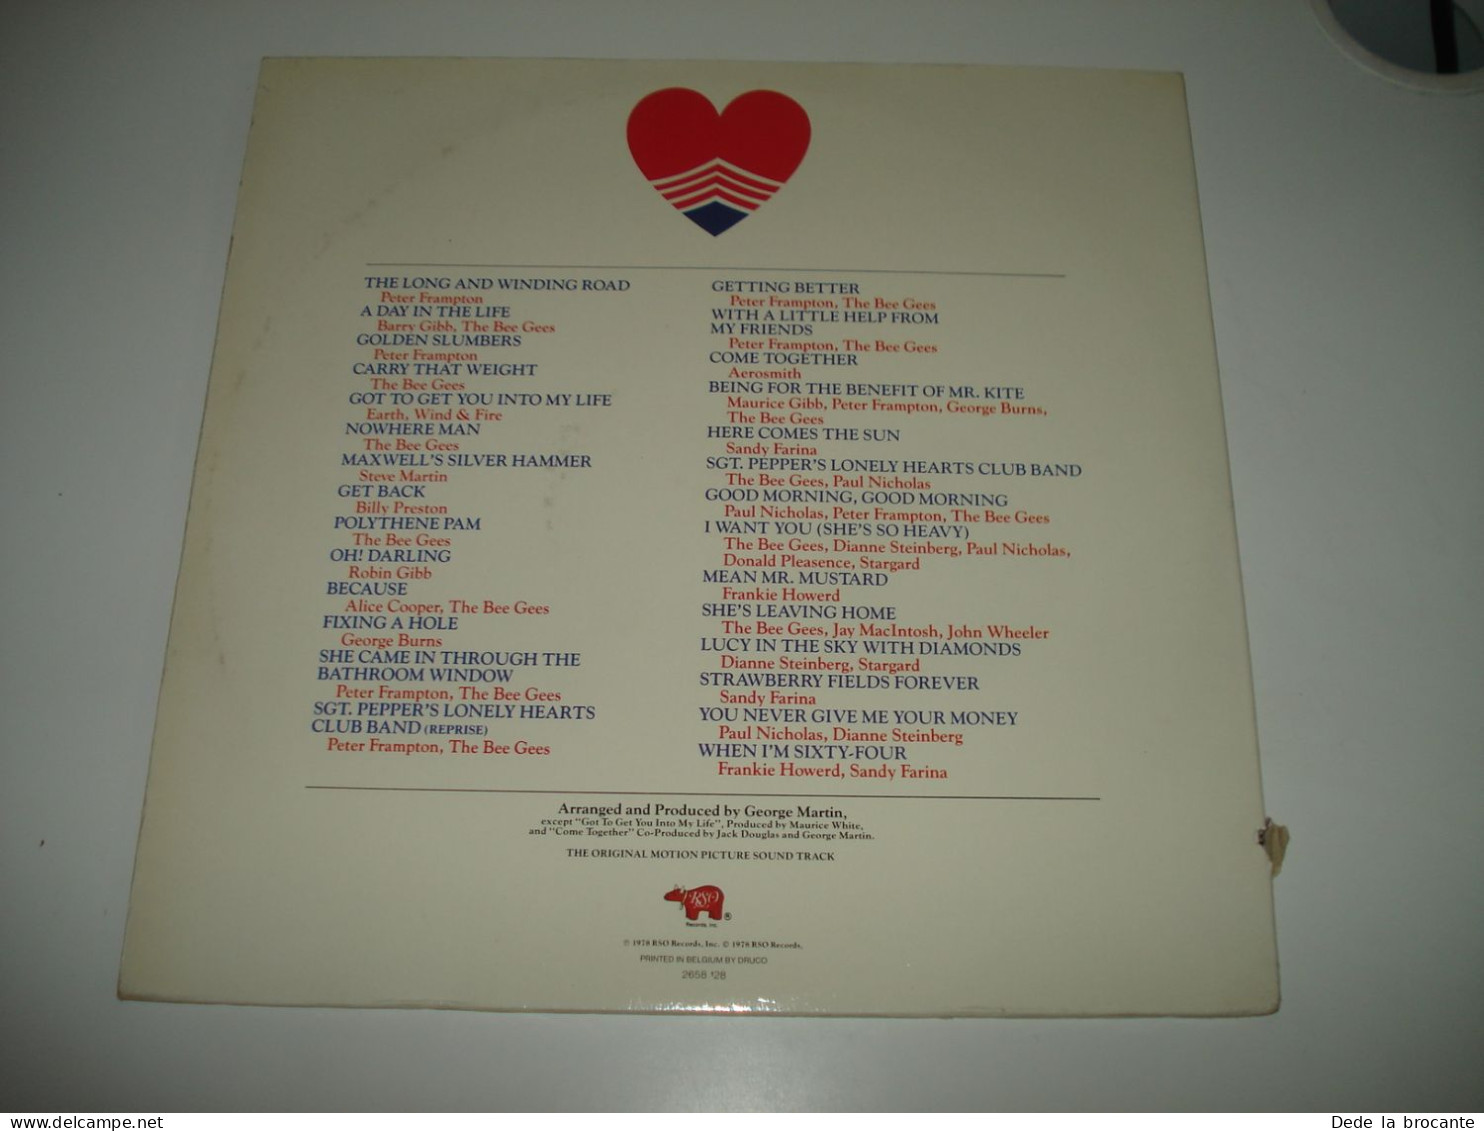 B8 / Sgt Pepper's Lonely Hearts Club Band  Bee Gees - 2658 128 - BE 1978 - M/VG+ - Soundtracks, Film Music